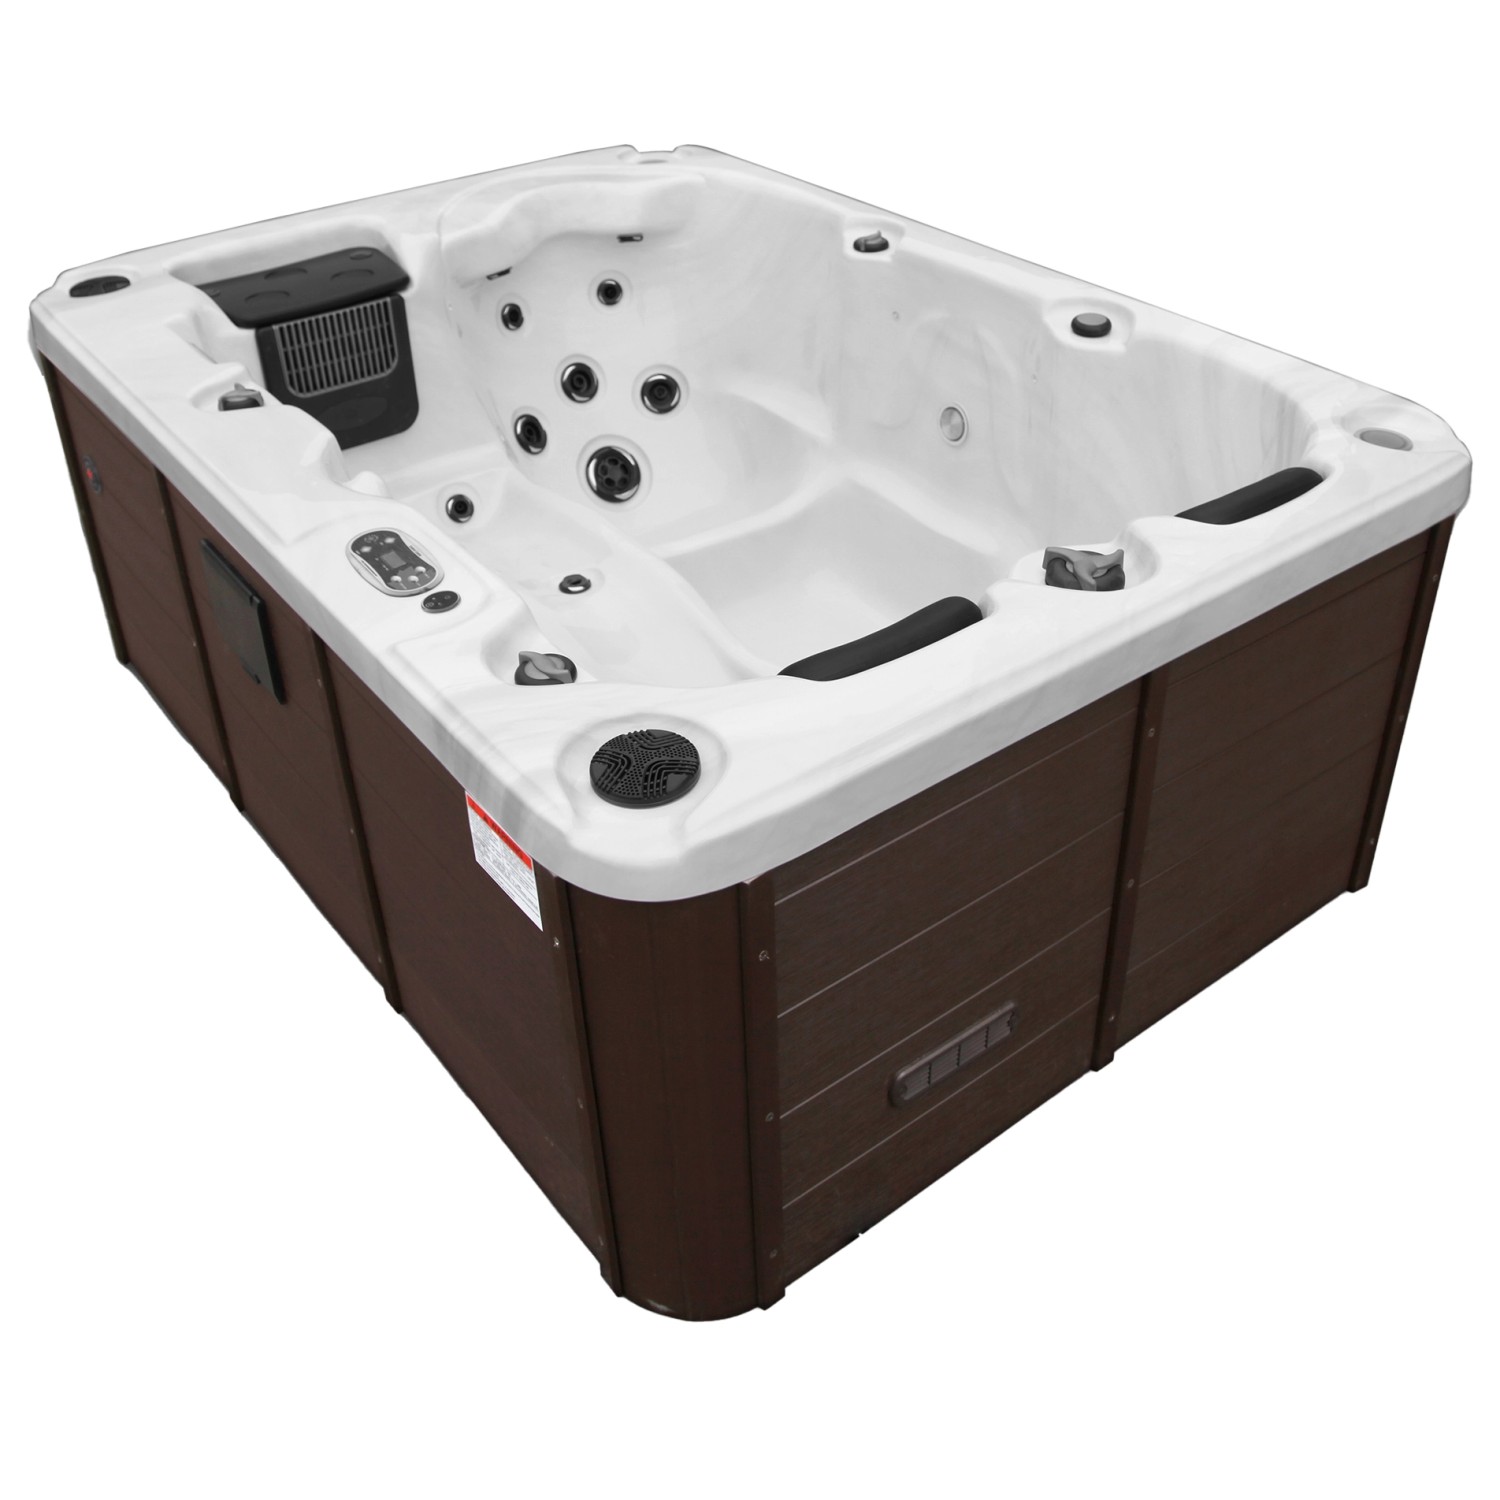 Canadian Spa Whirlpool Montreal 780 mm x 2130 mm x 1500 mm von Canadian Spa